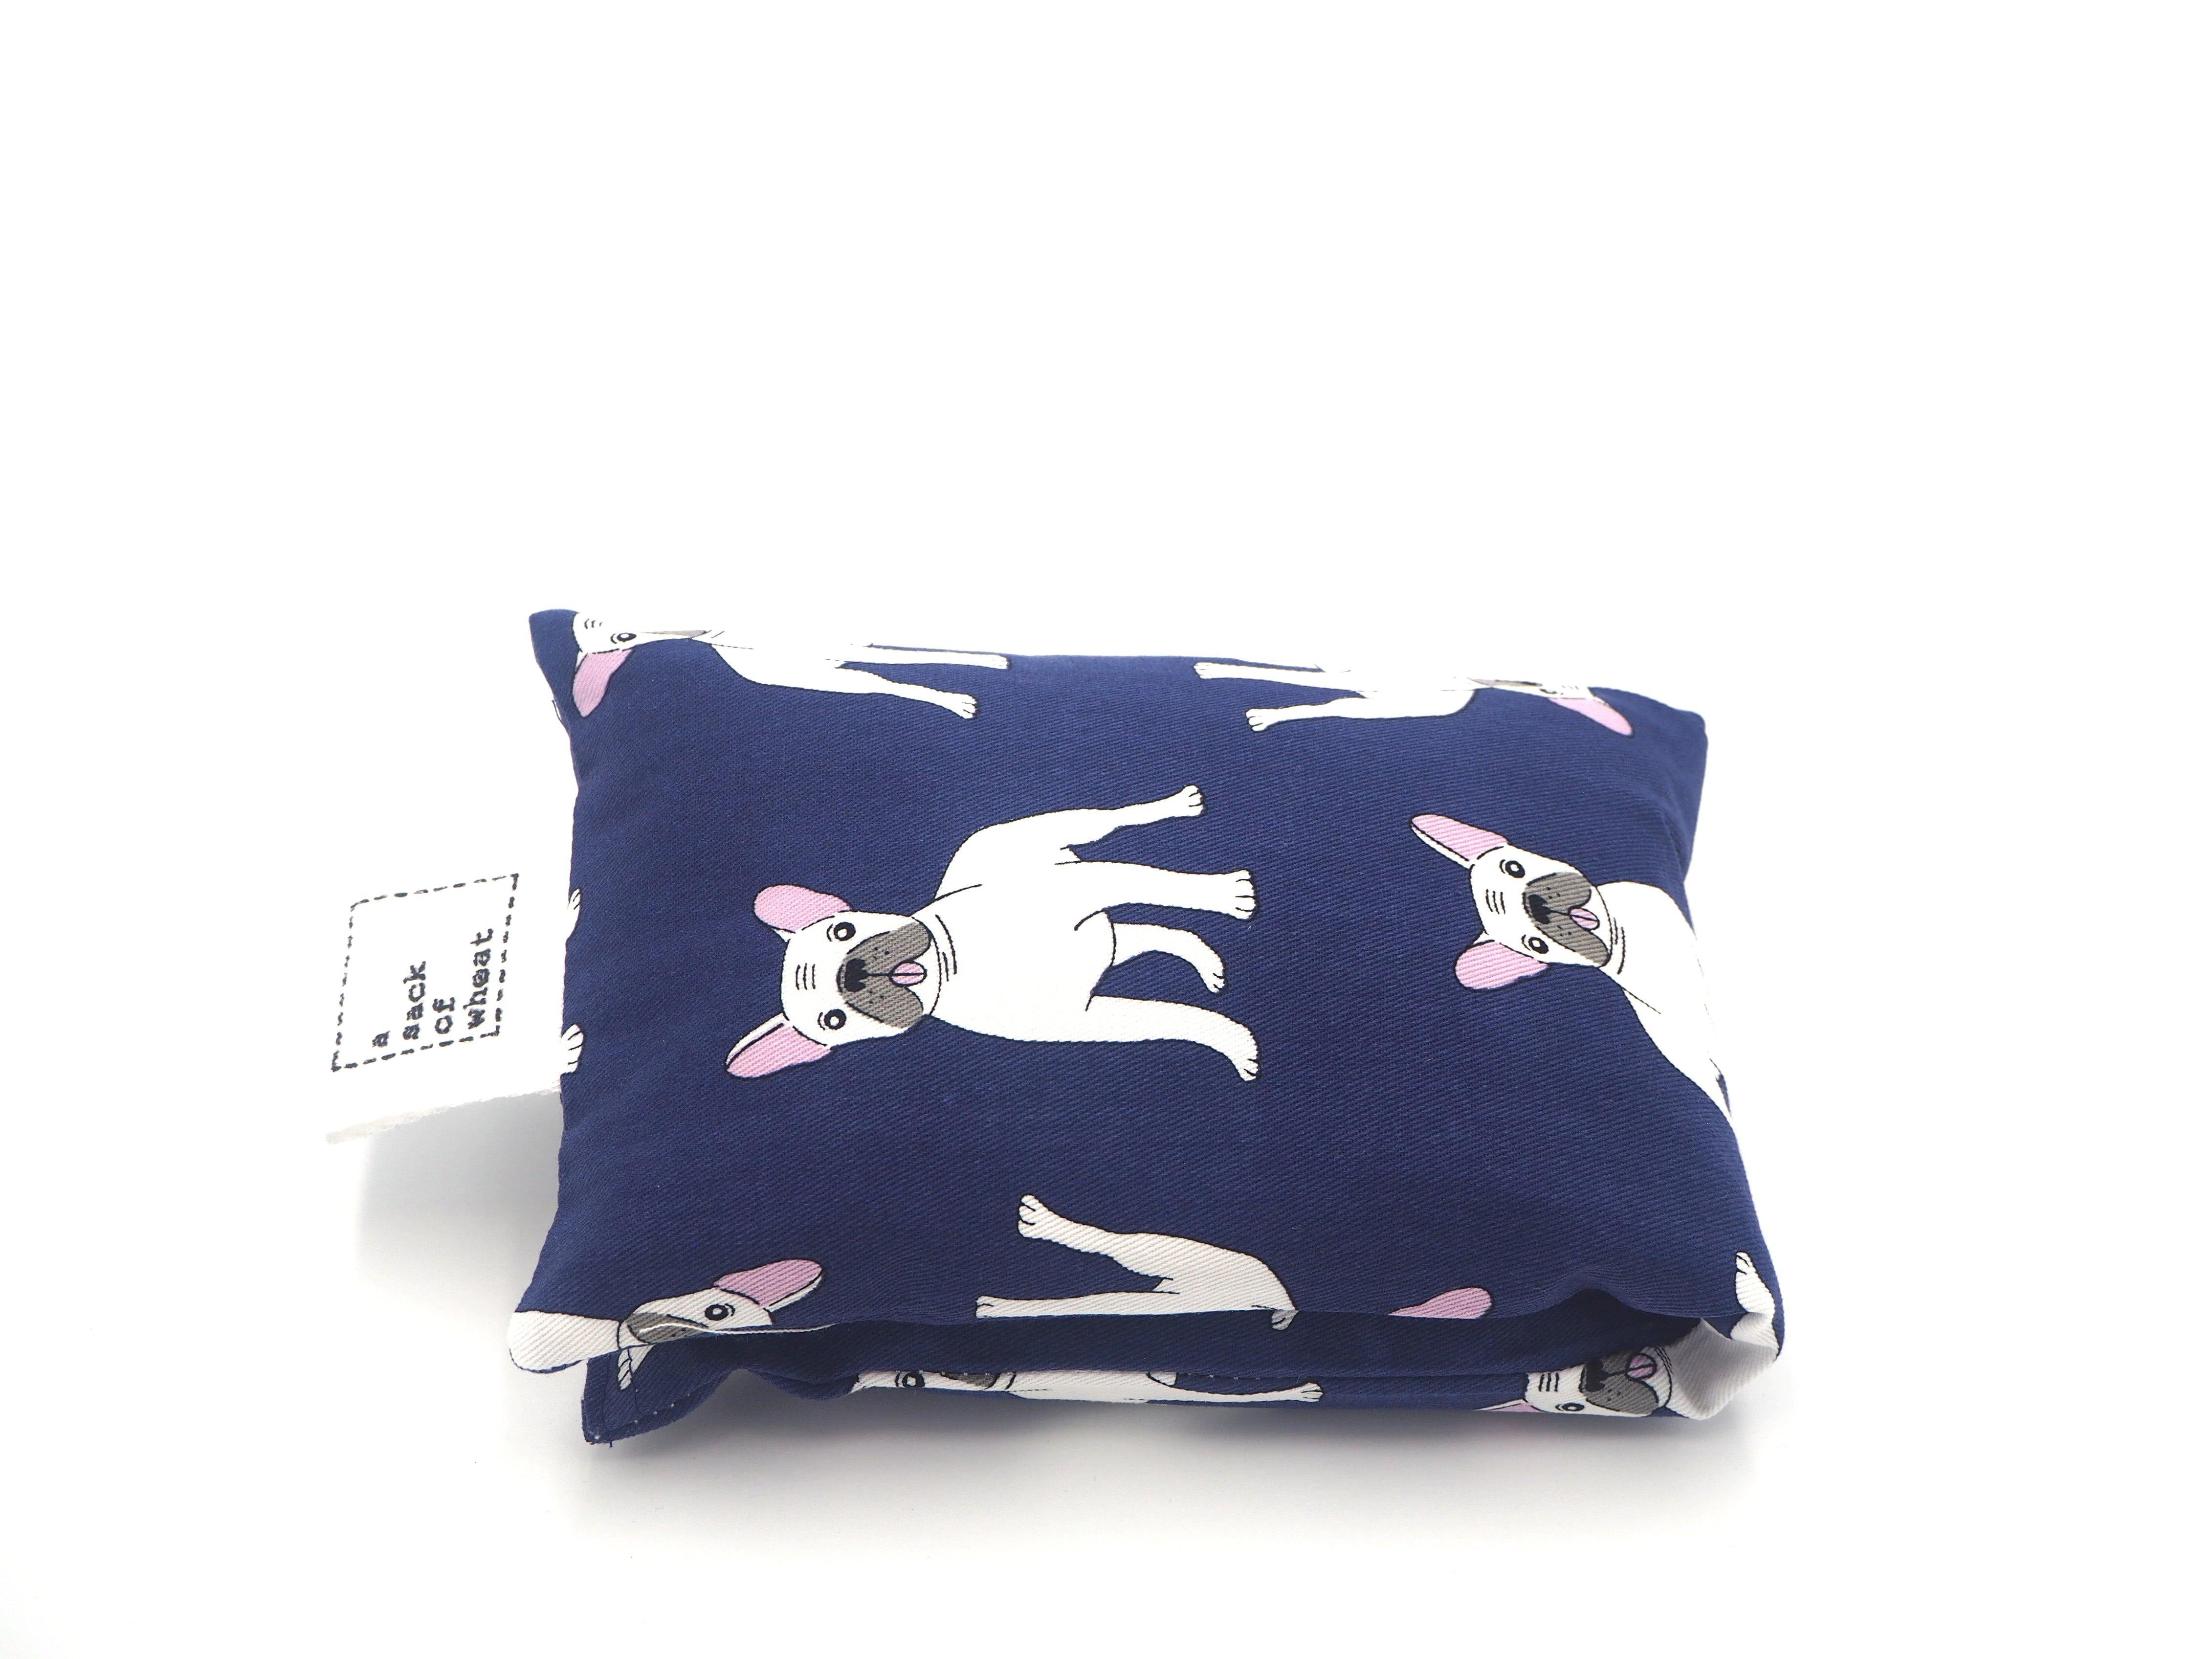 Folded view of A Sack Of Wheat, in a cute French Bull dog with attitude print! 100% cotton fabric